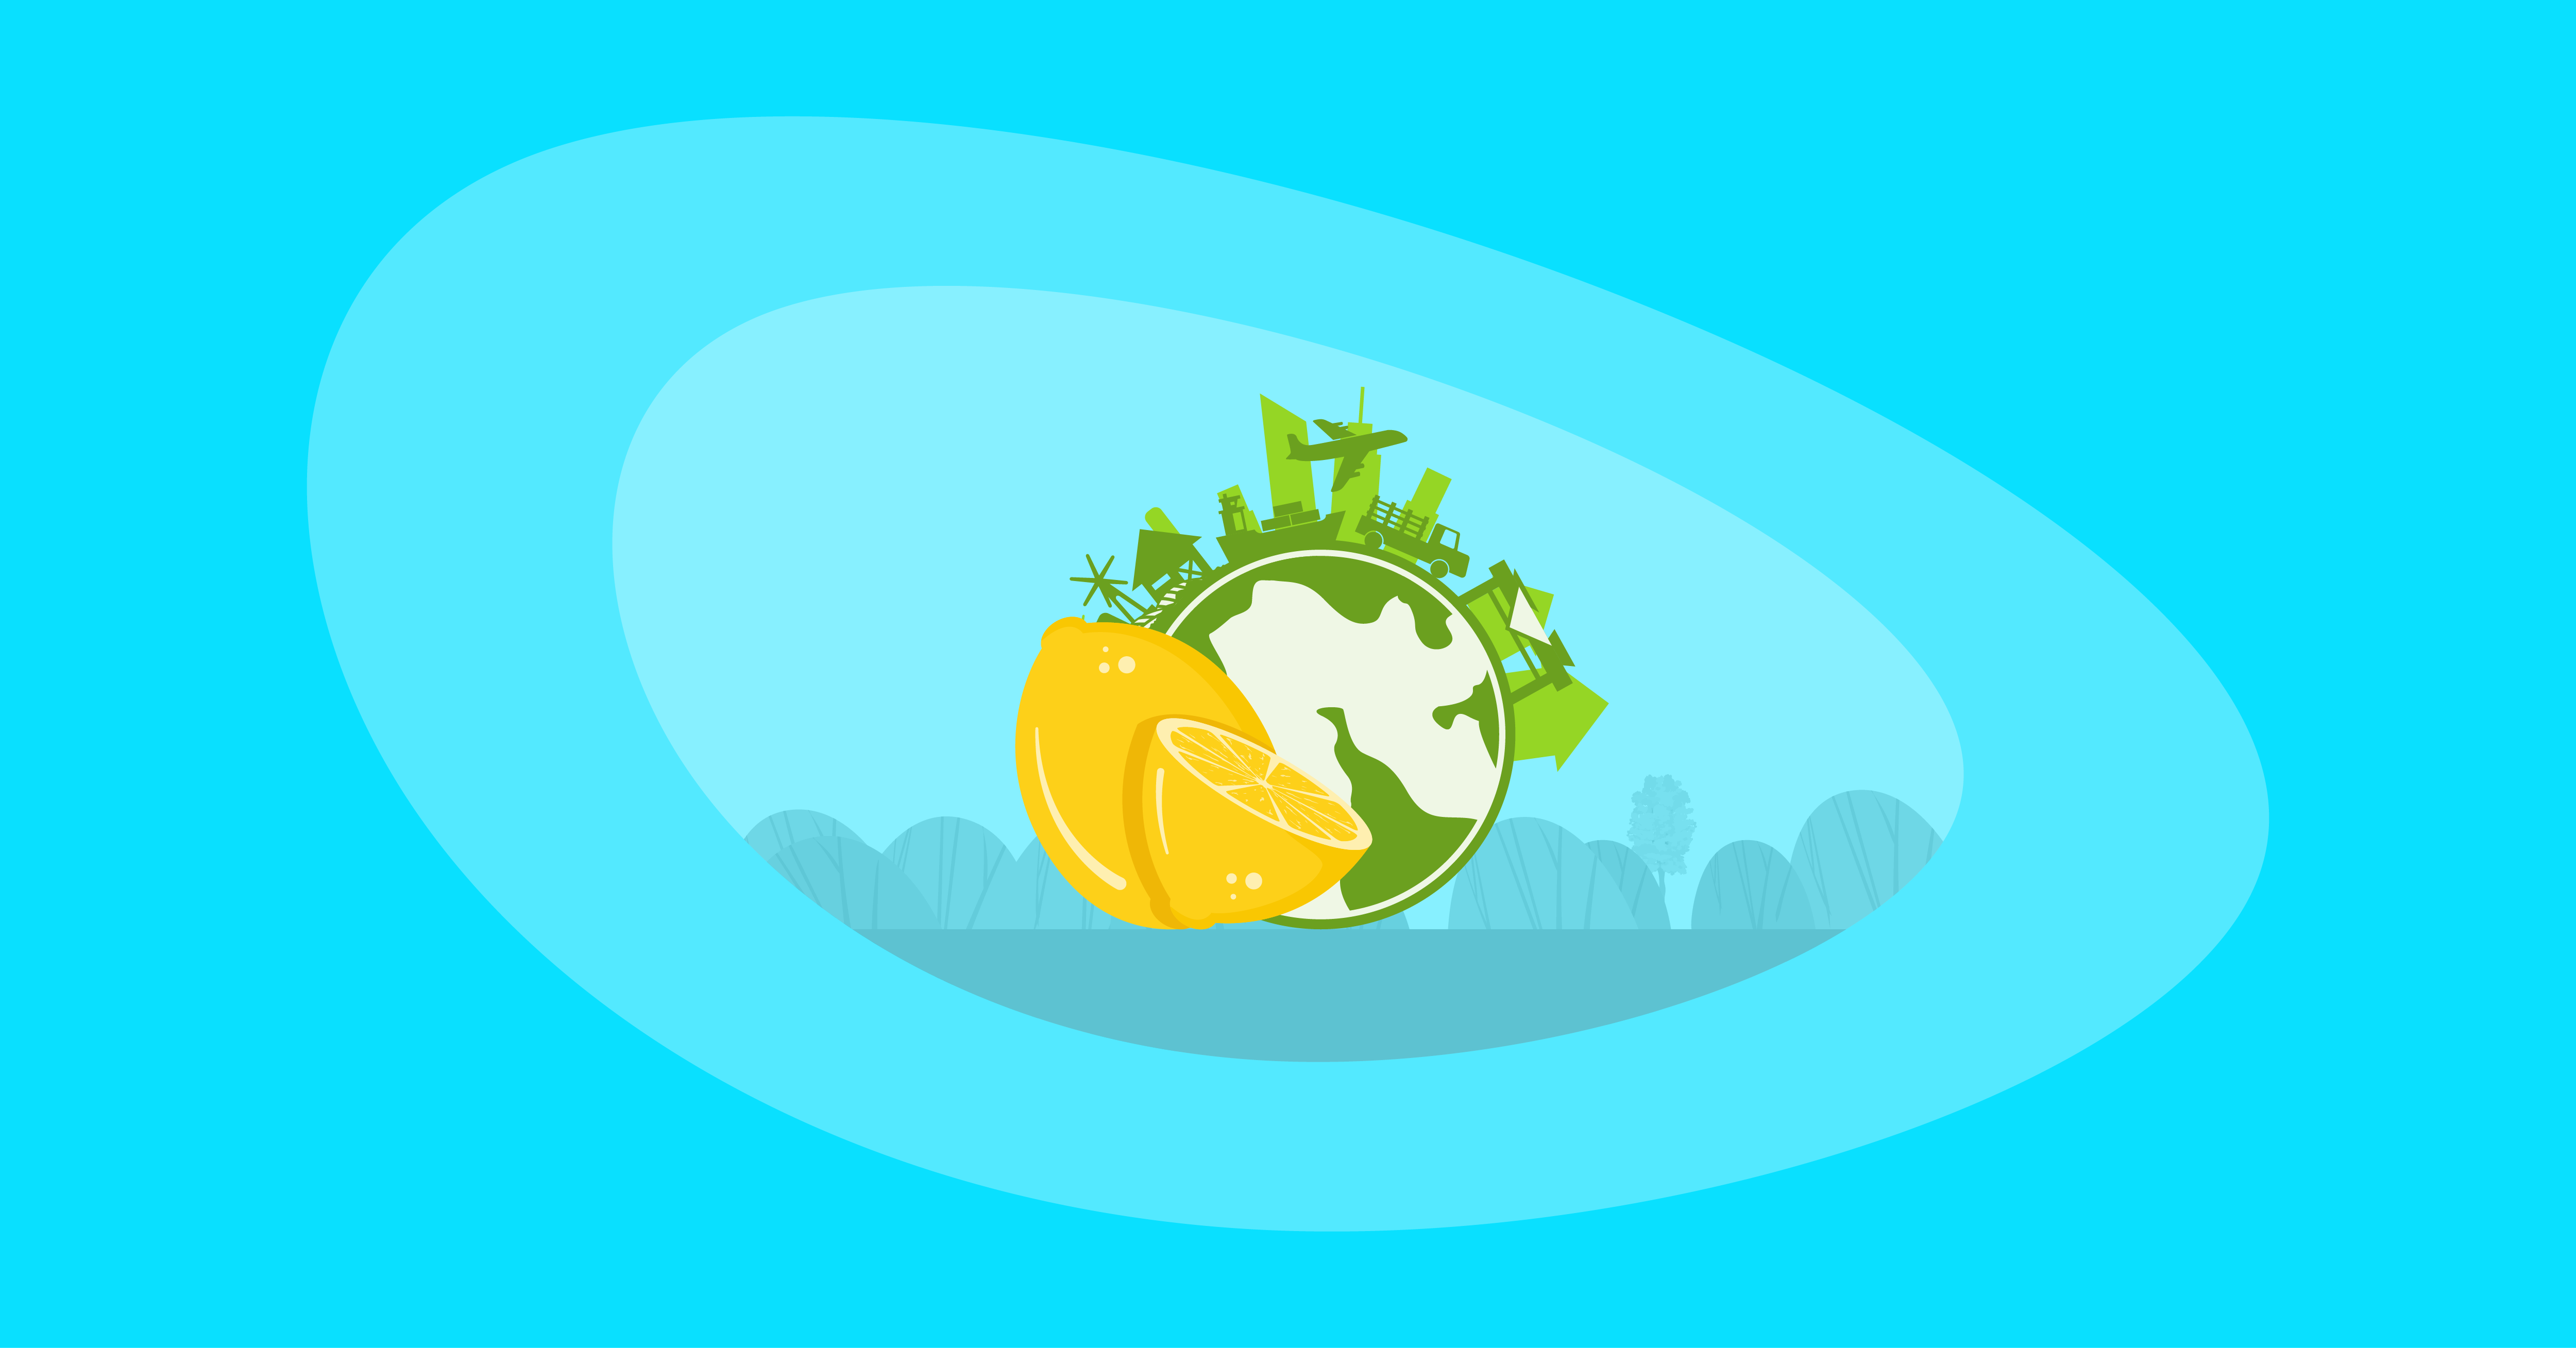 Building a lemon bioeconomy with green technology - Advanced